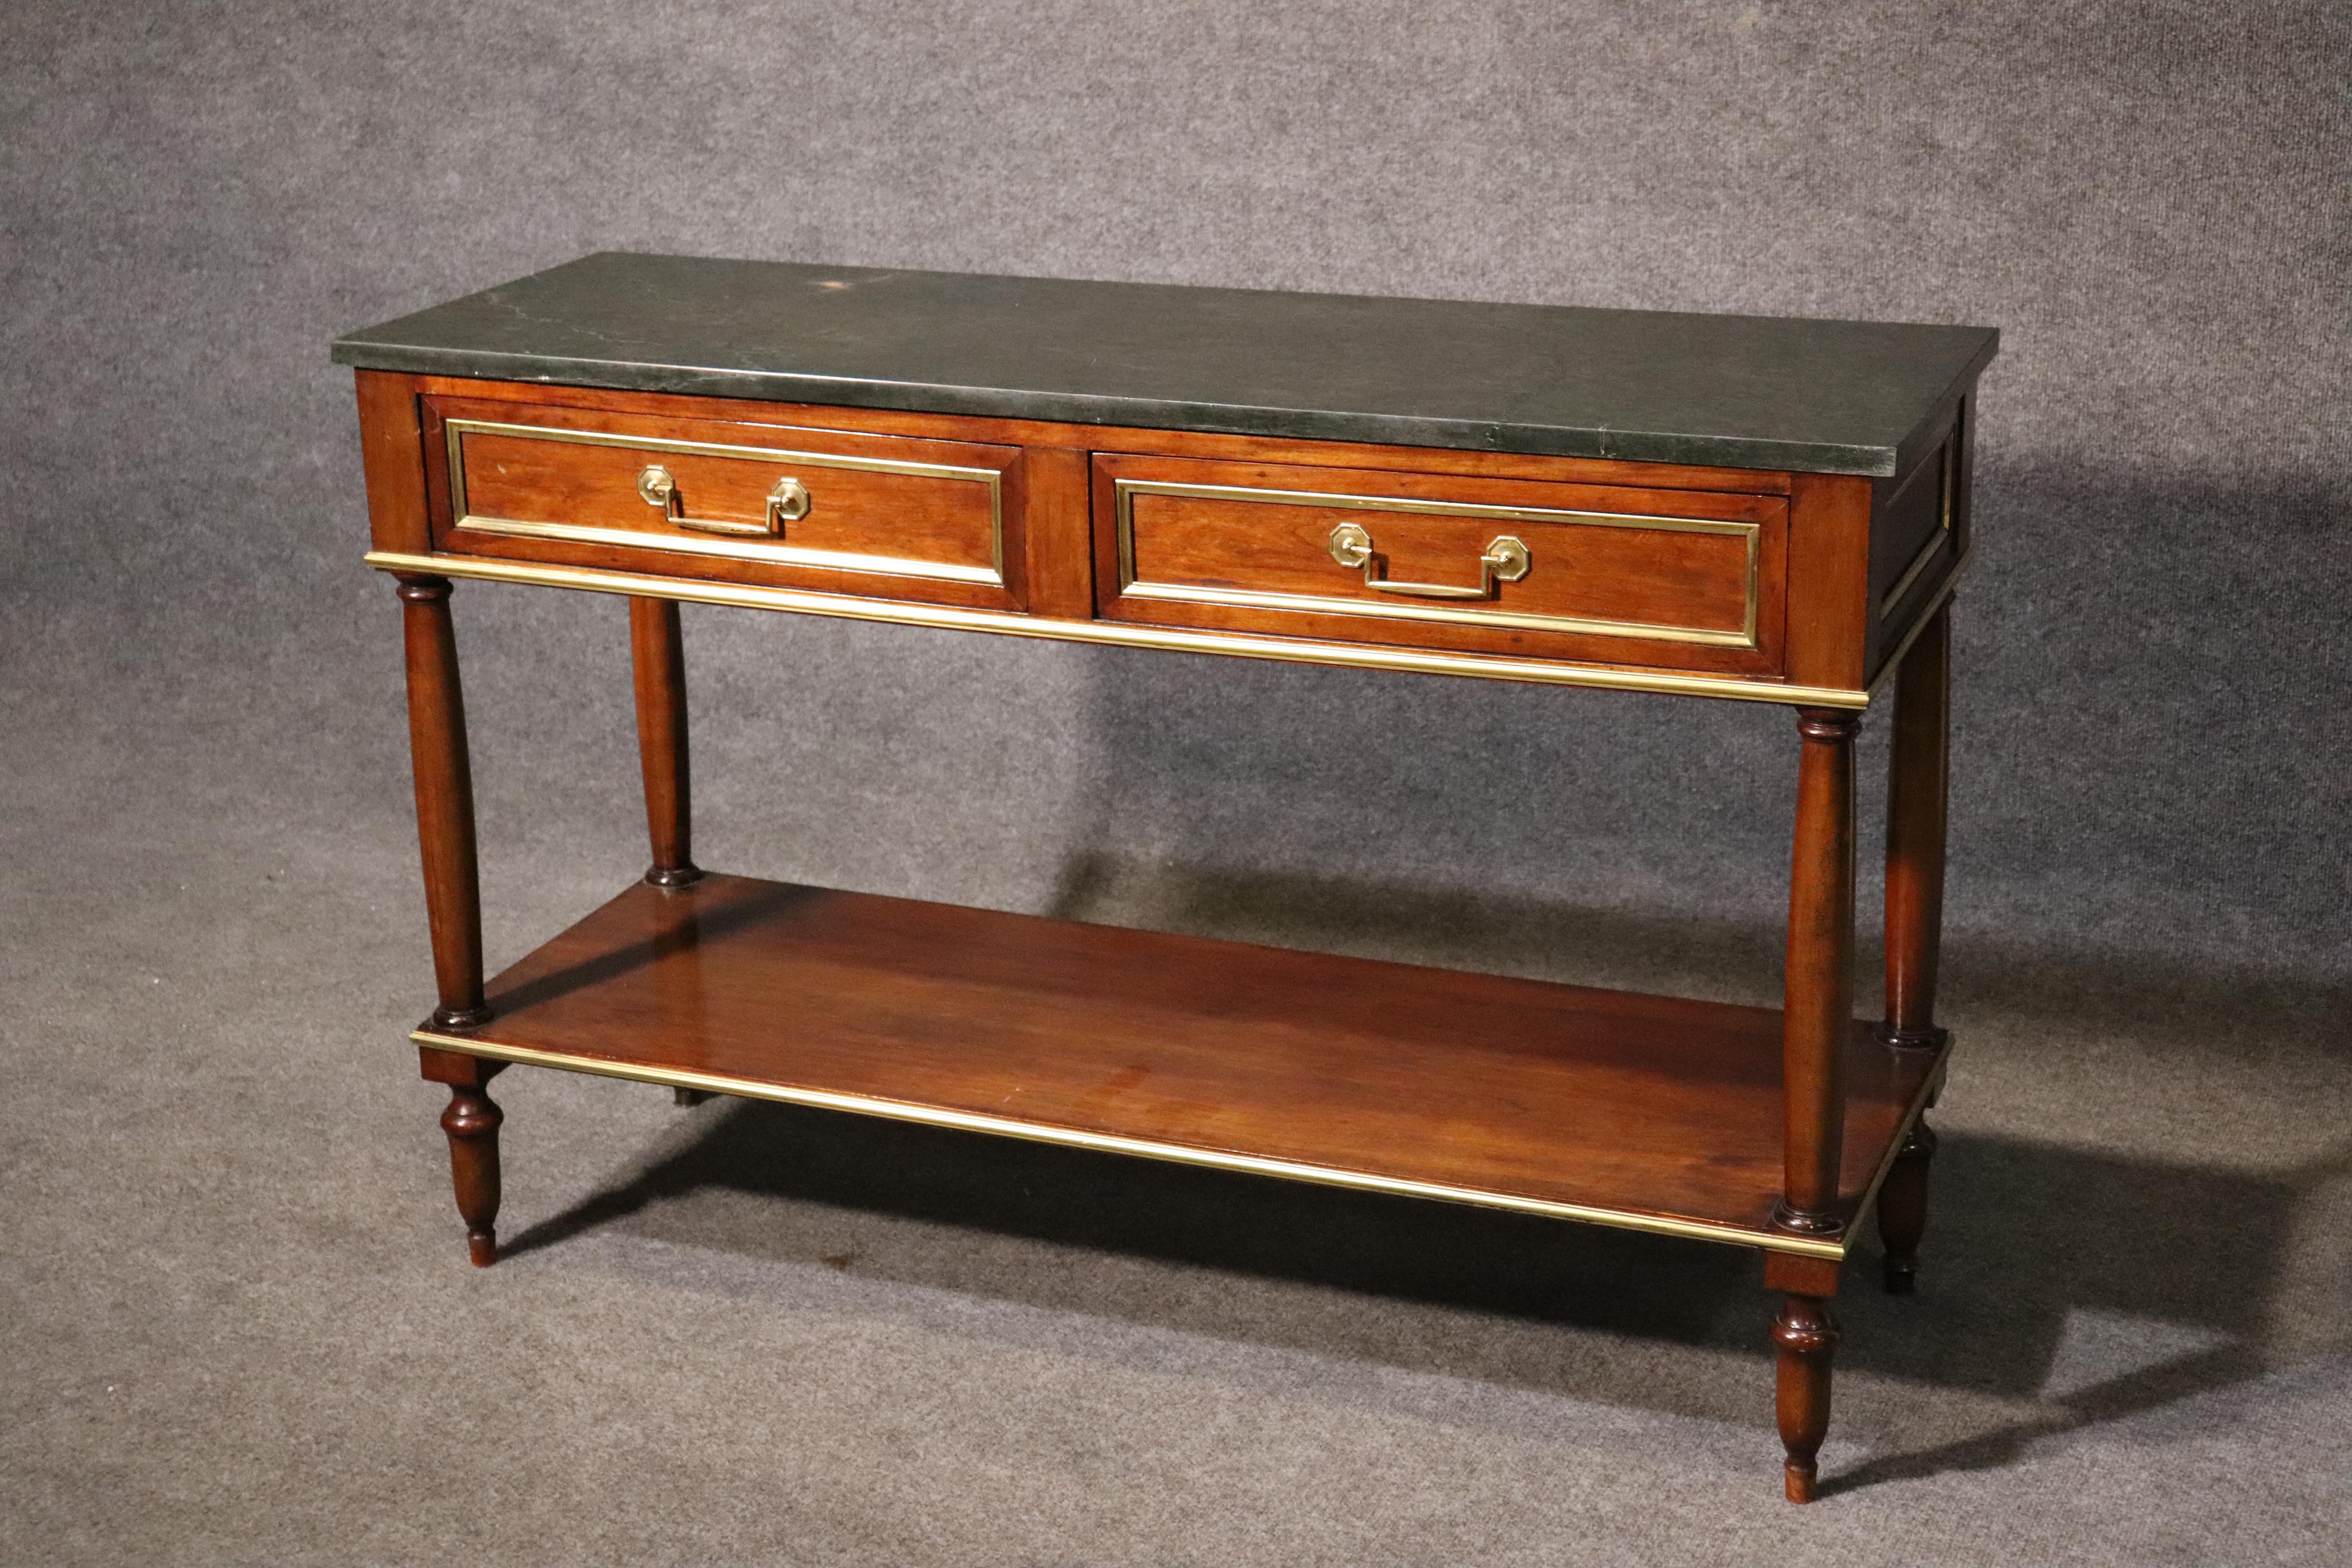 This is a gorgeous Maison Jansen attributed console table, circa 1940. Featuring the best verdi green marble top and fine brass trim, this console has the handsome lines of the Directoire period and a great mahogany case with dovetailed drawers. The